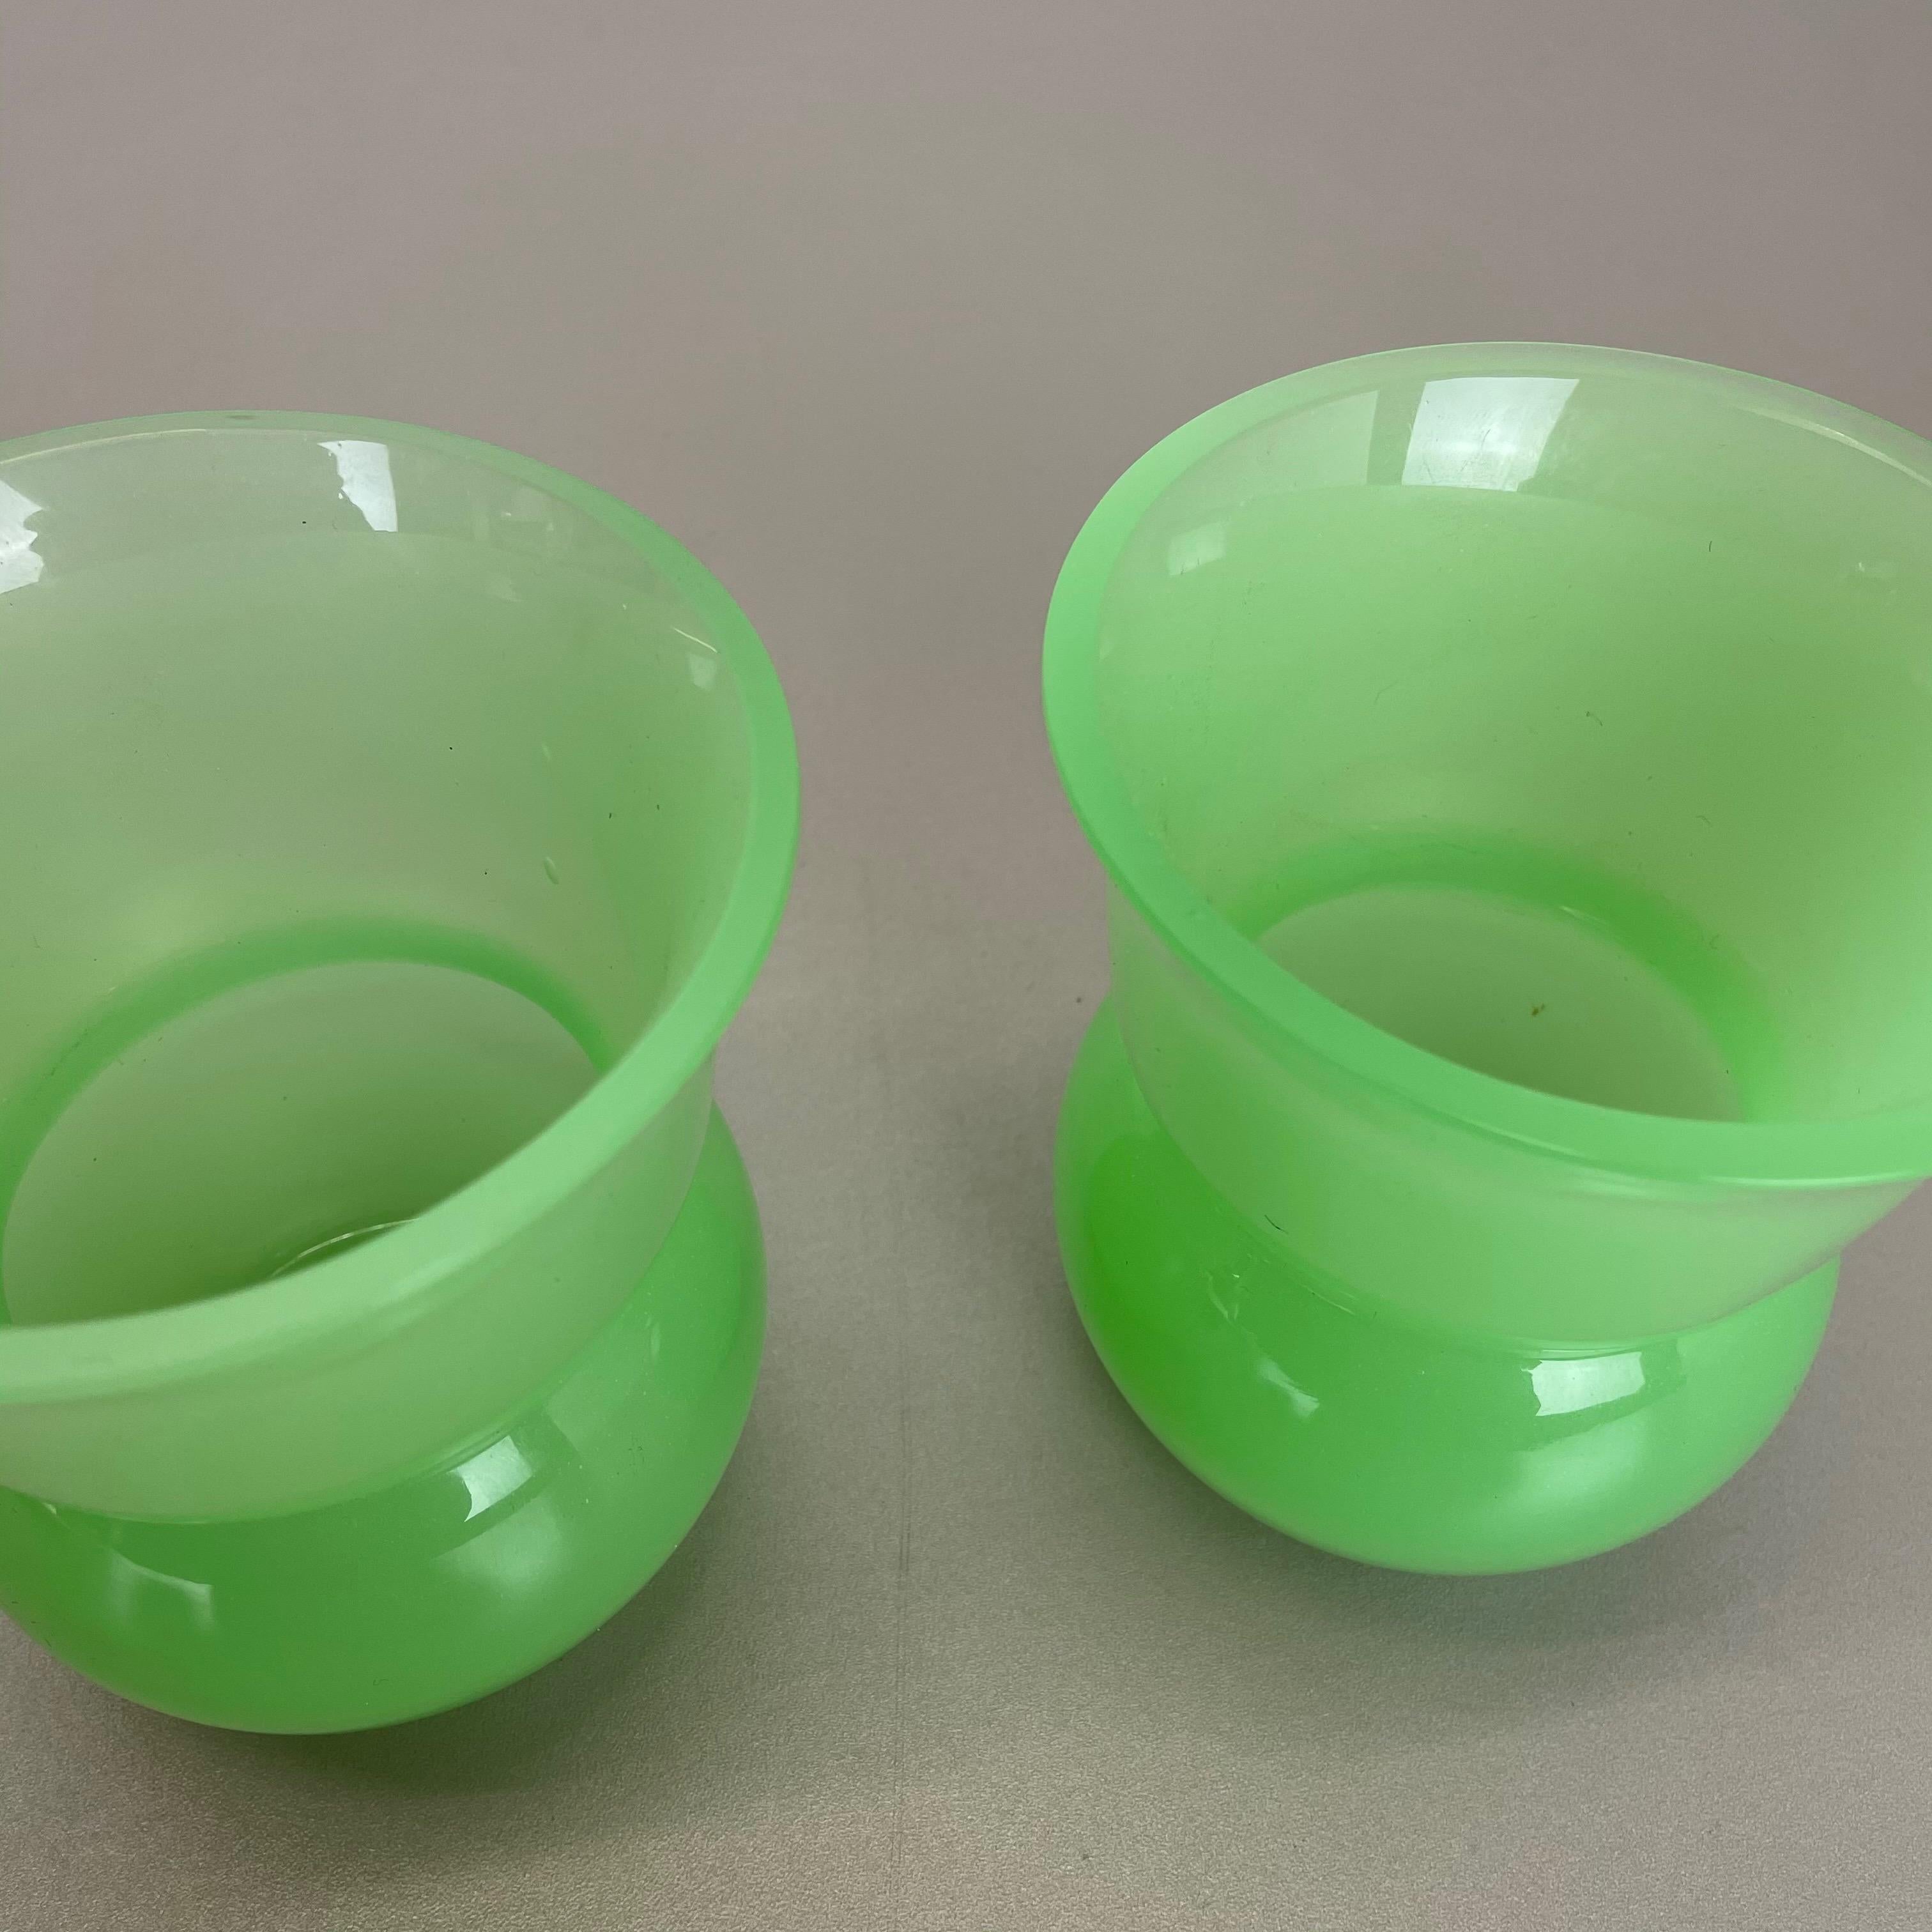 Set of 2 Green New Old Stock Murano Opaline Glass Vases by Gino Cenedese, 1960s For Sale 2